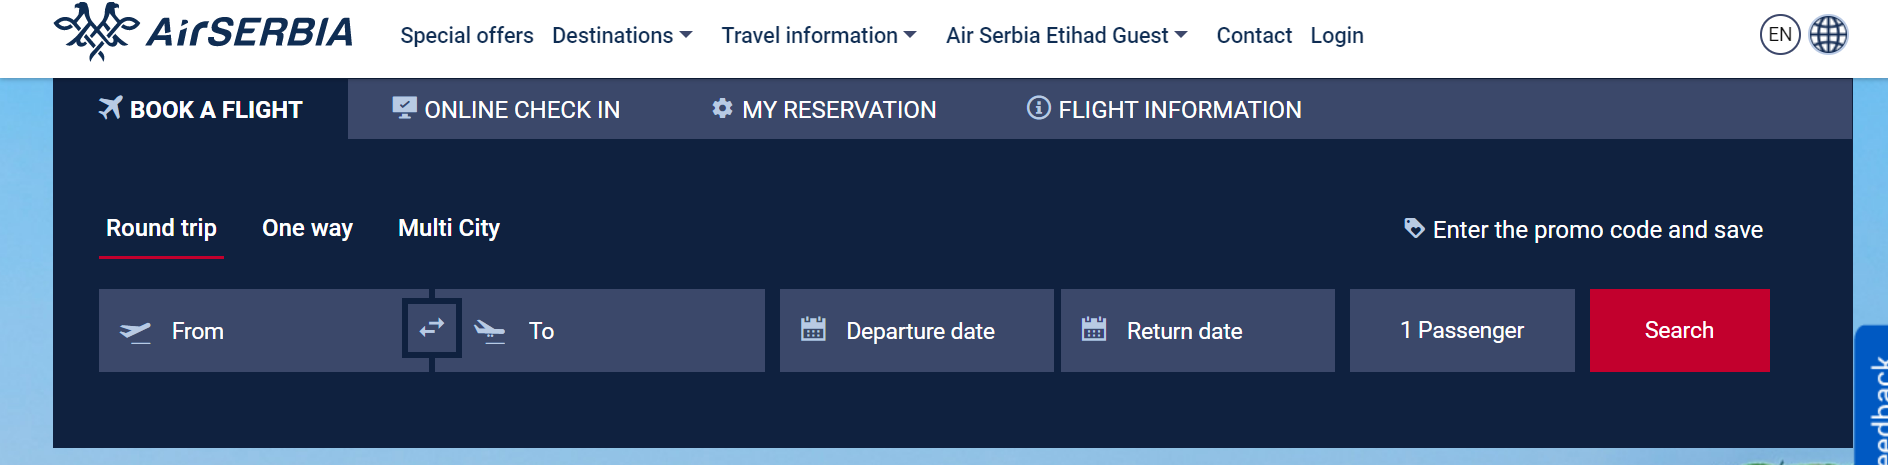 Air Serbia official page